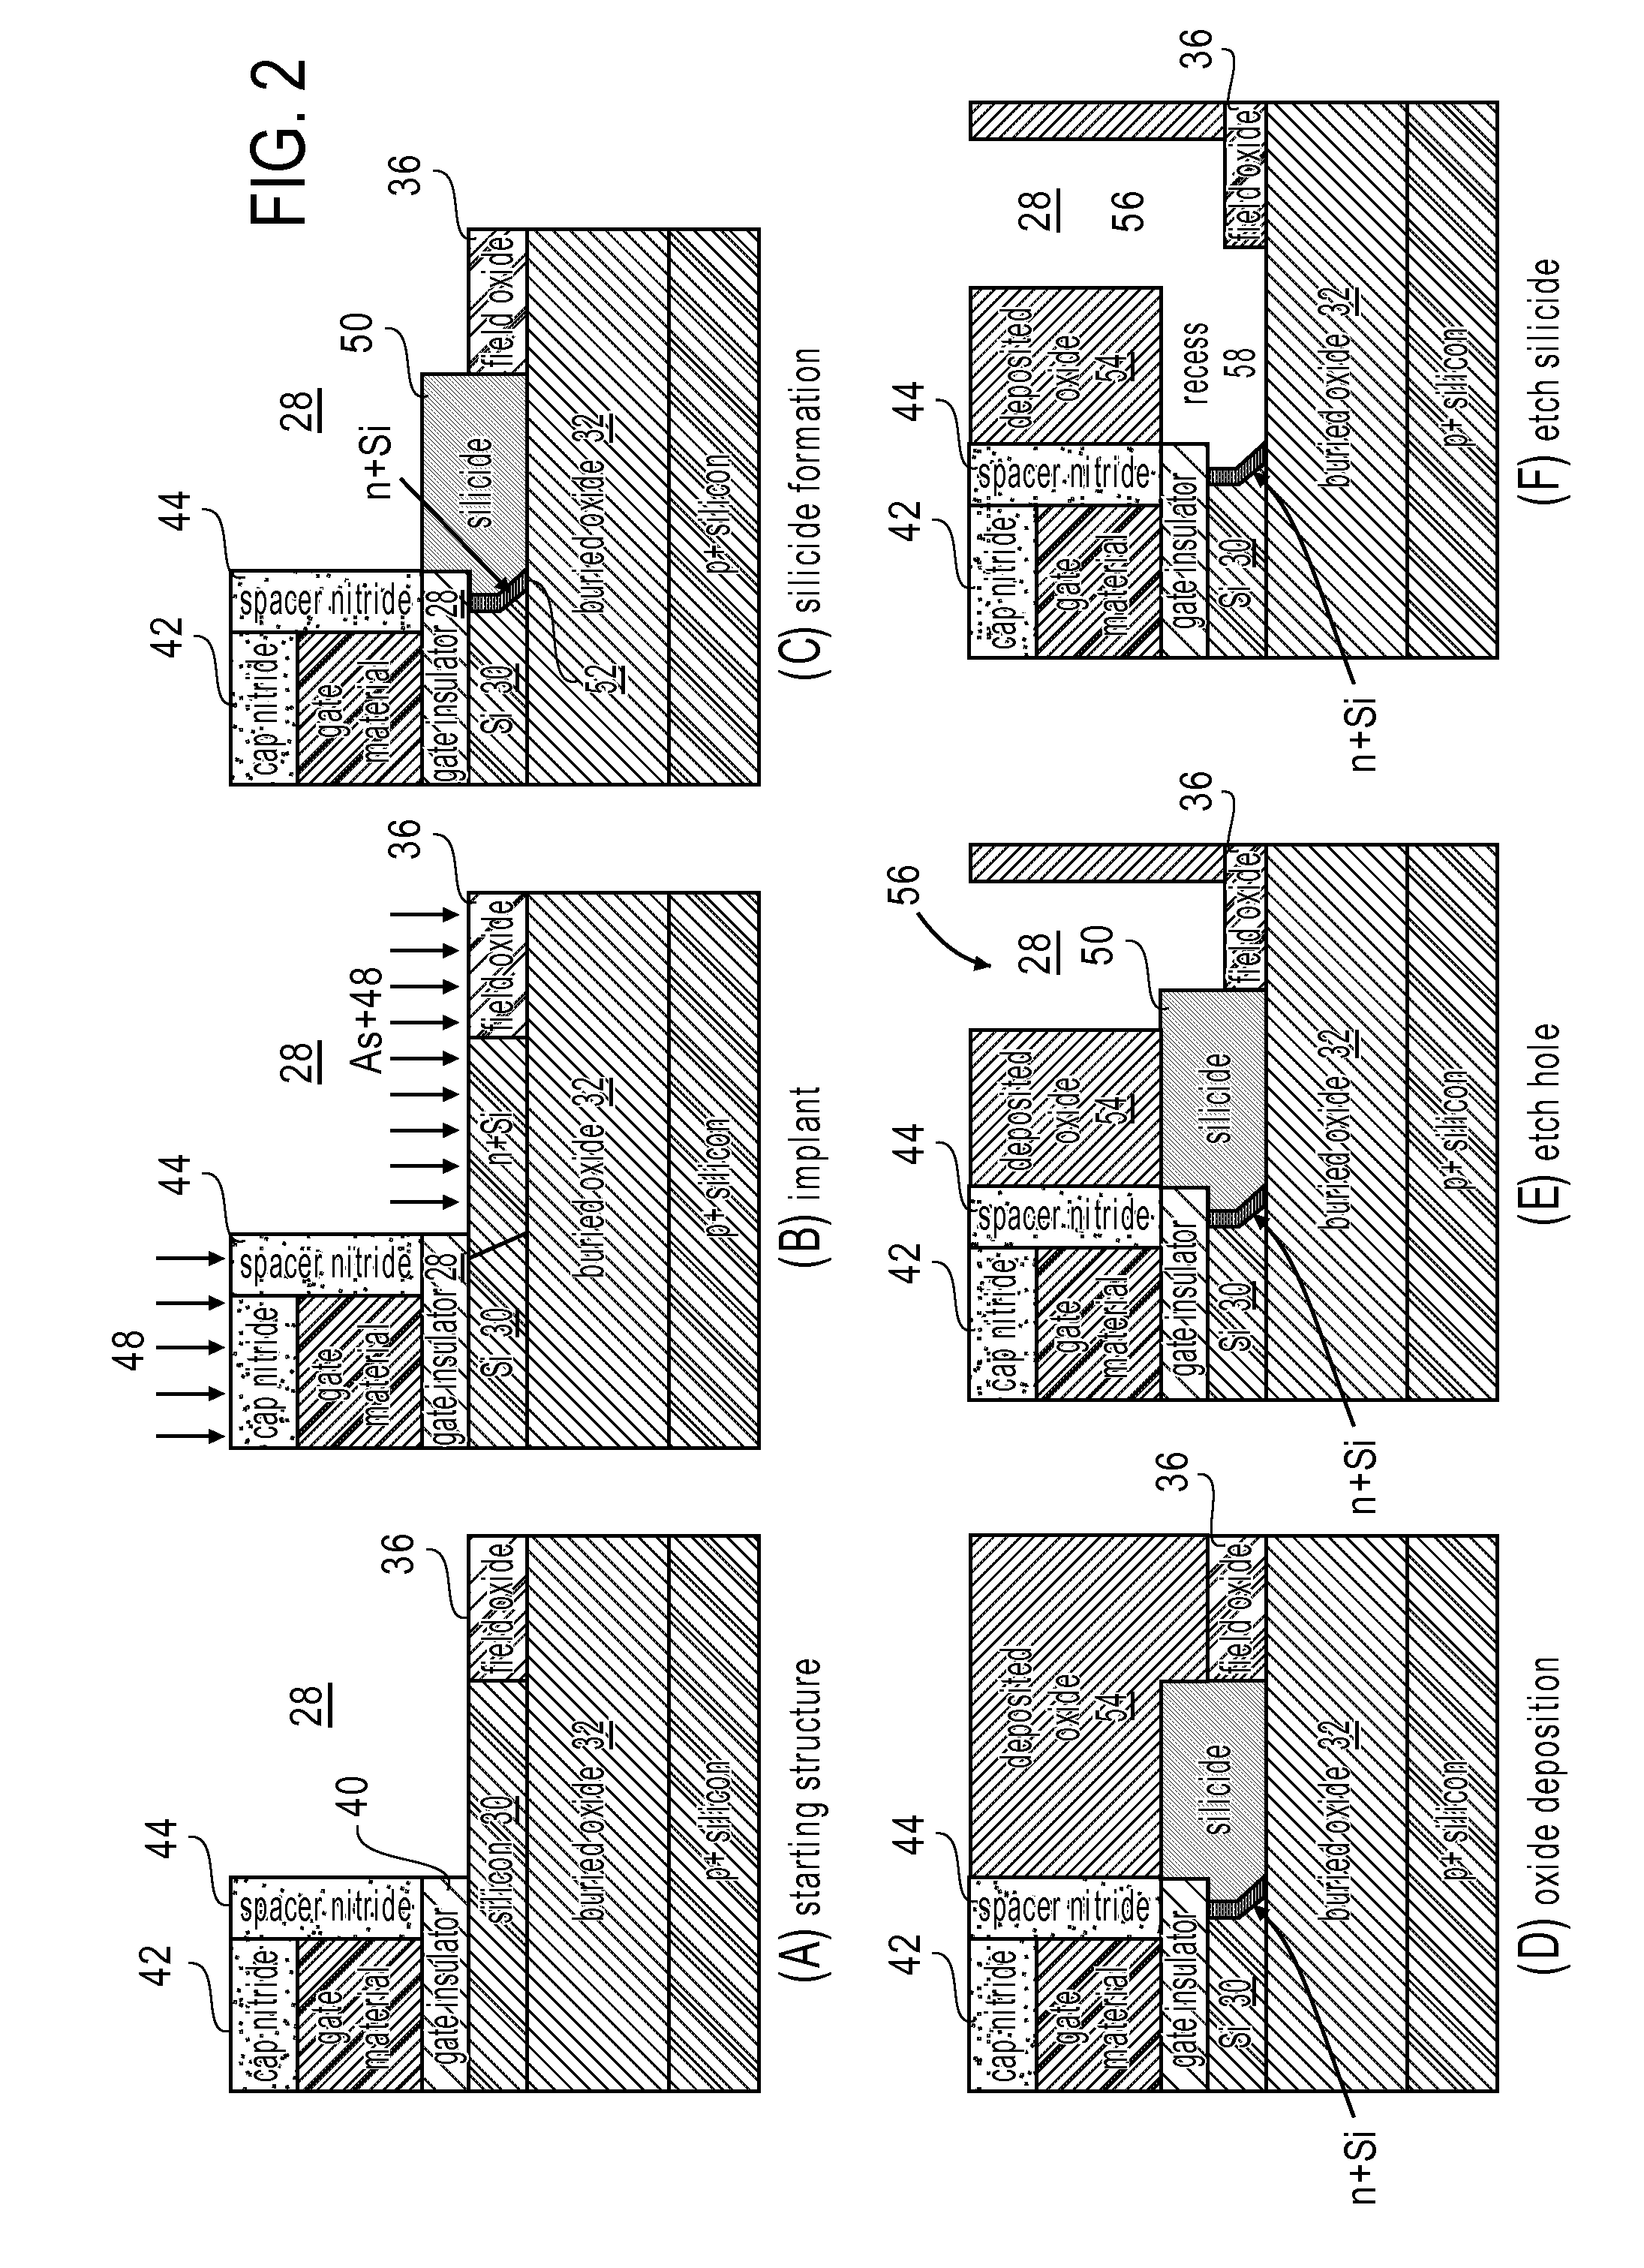 Process for fabricating a field-effect transistor with doping segregation used in source and/or drain